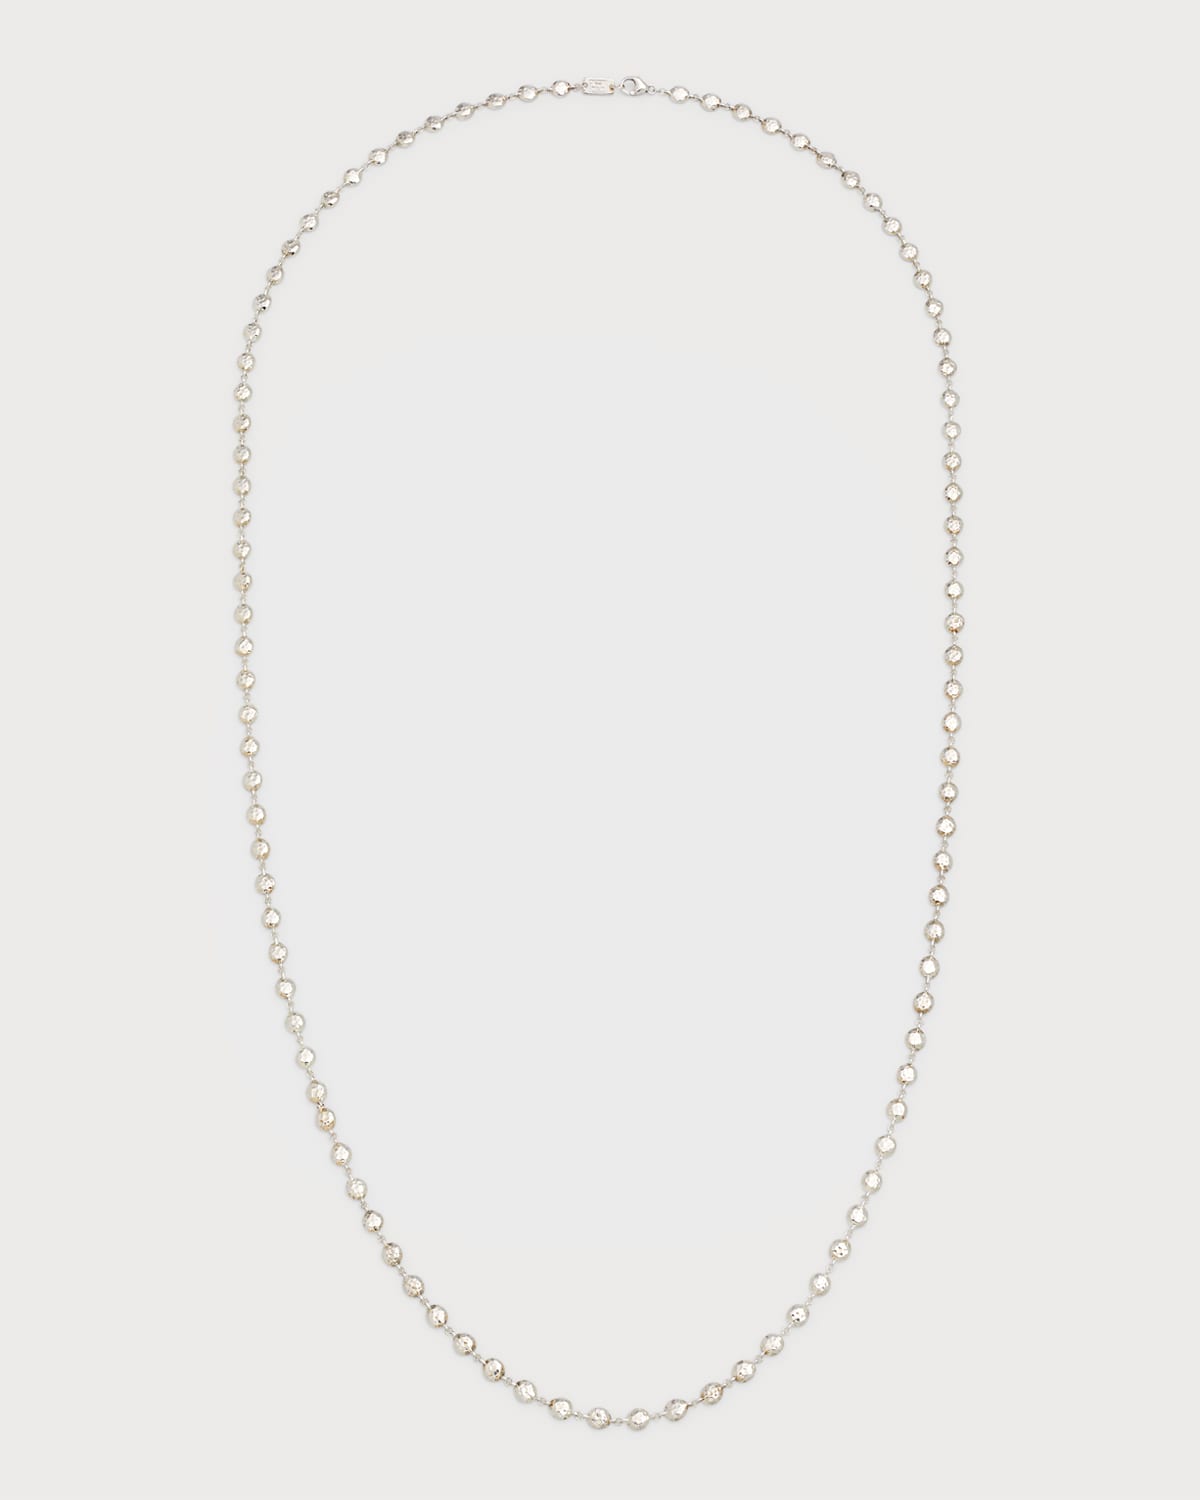 Long Flat Hammered Bead Necklace in Sterling Silver